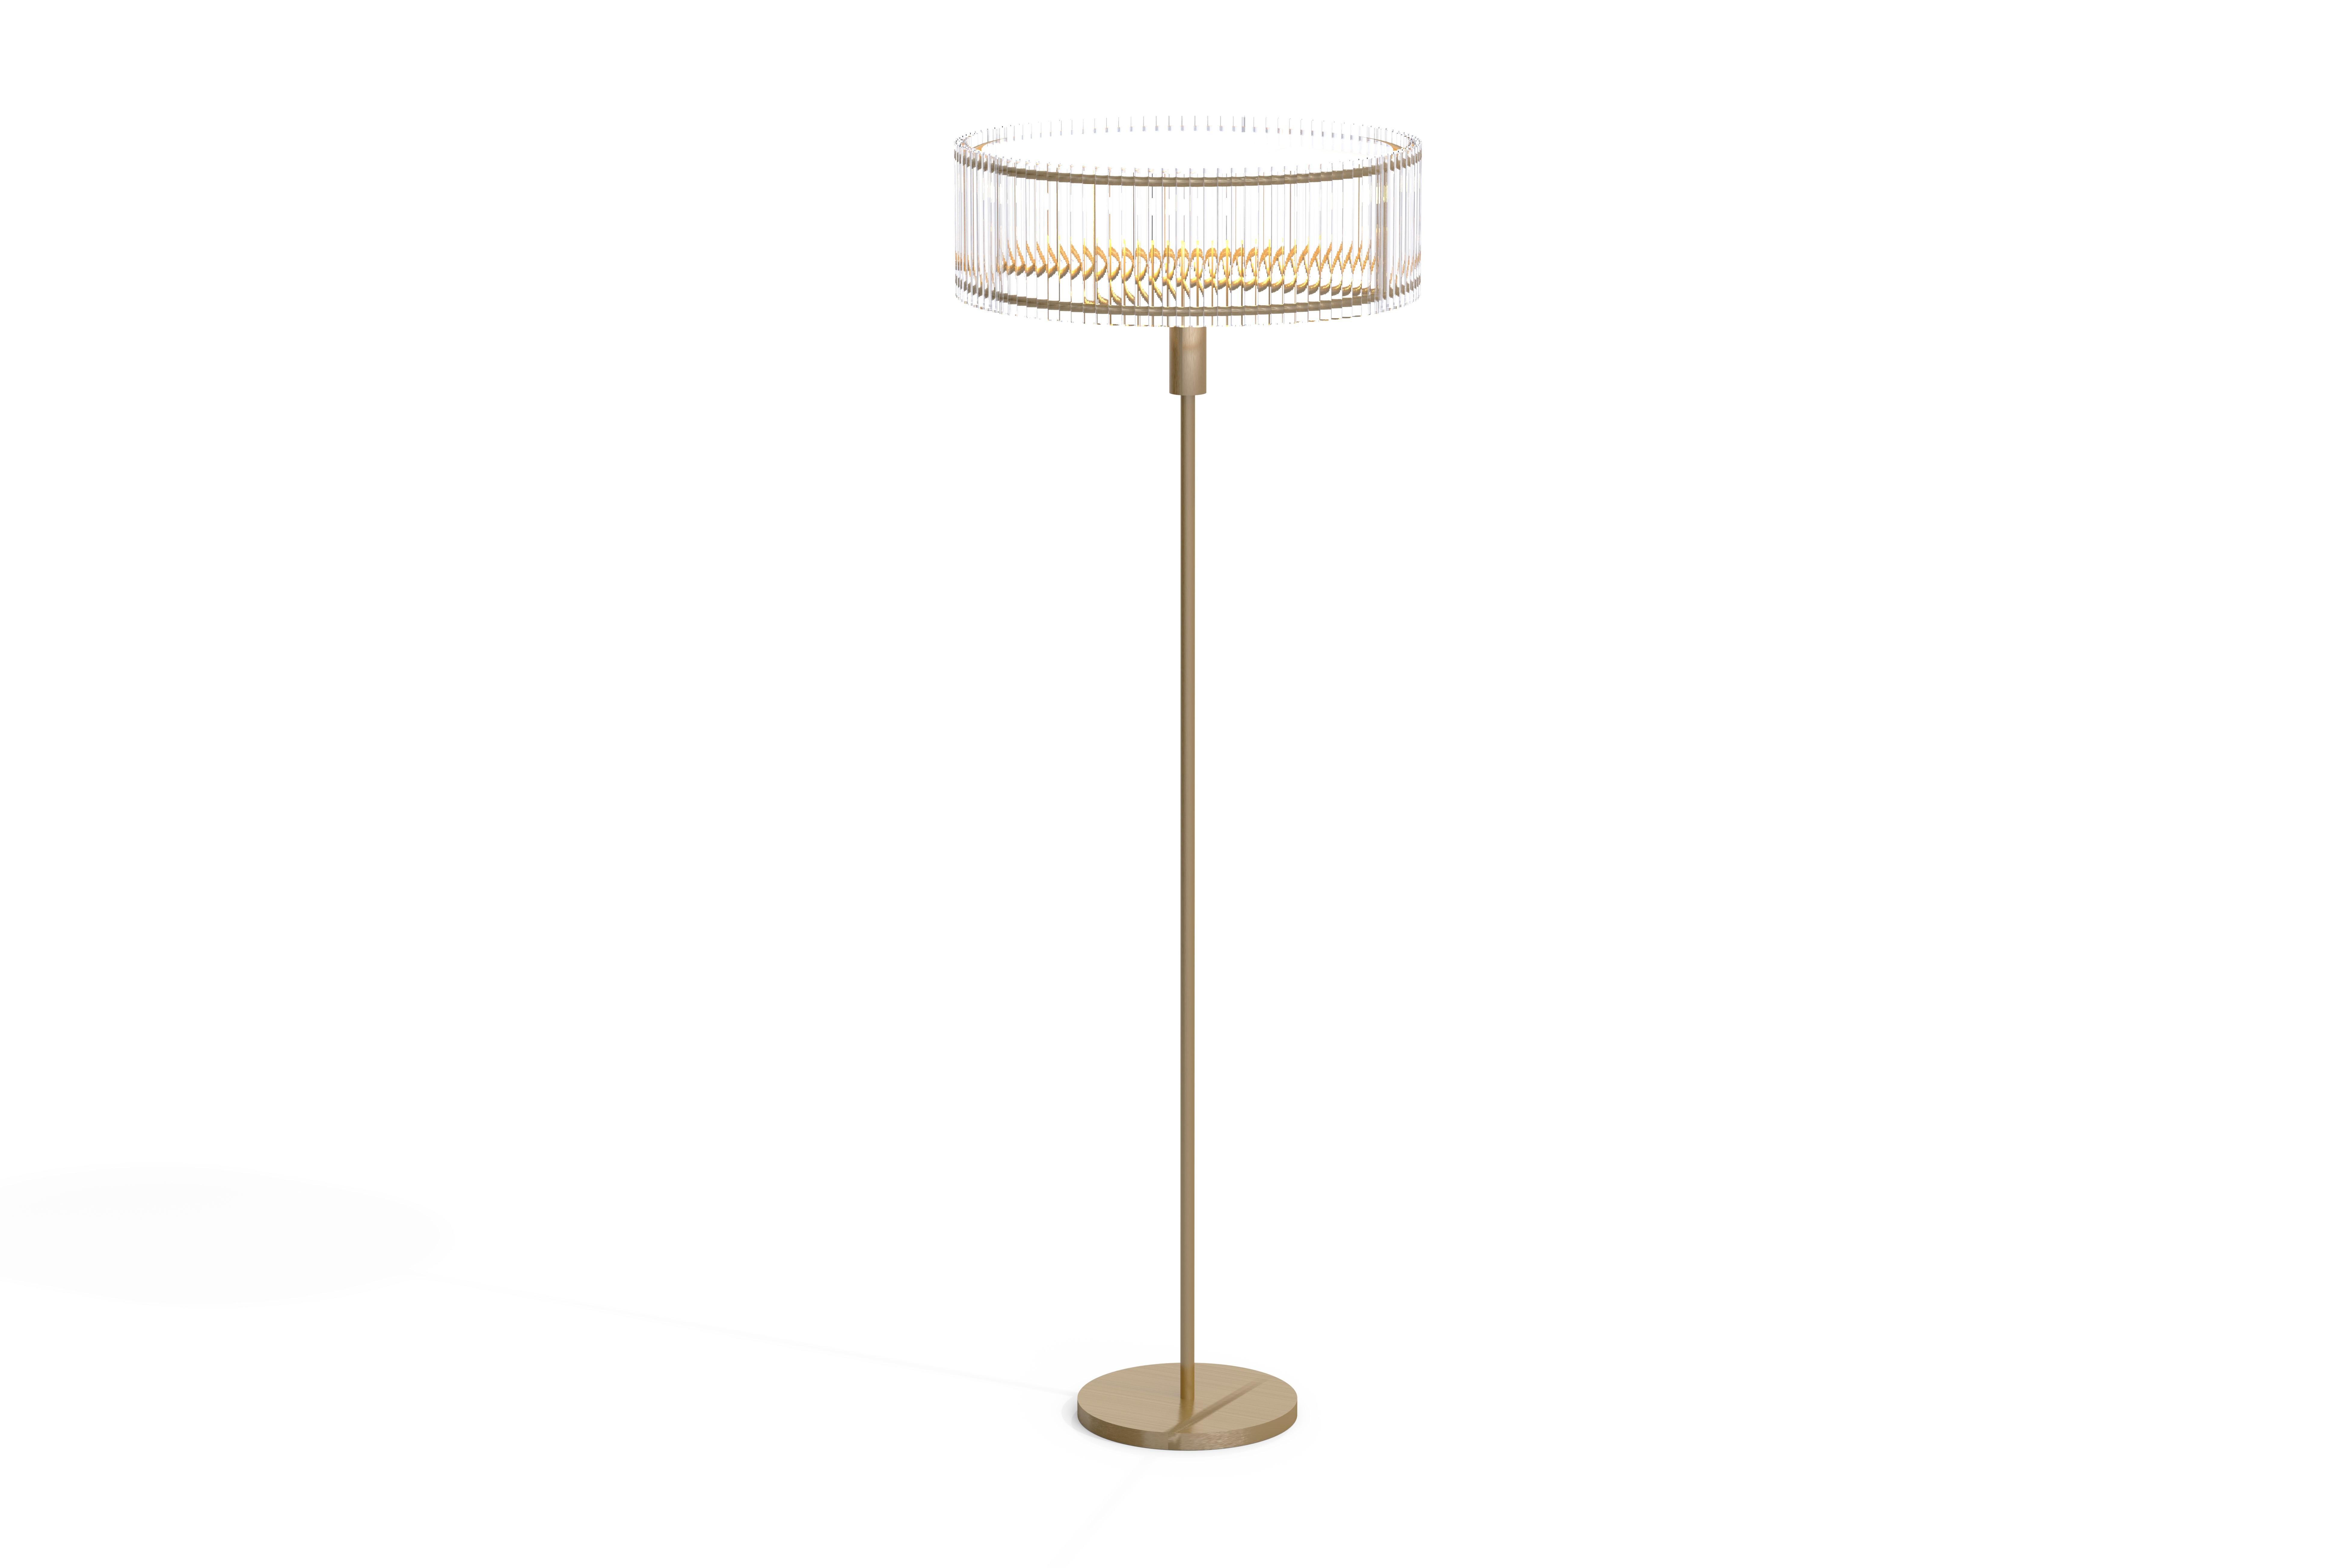 Imagin Contemporary Floor Lamp in Brushed Brass and Fluted Glass